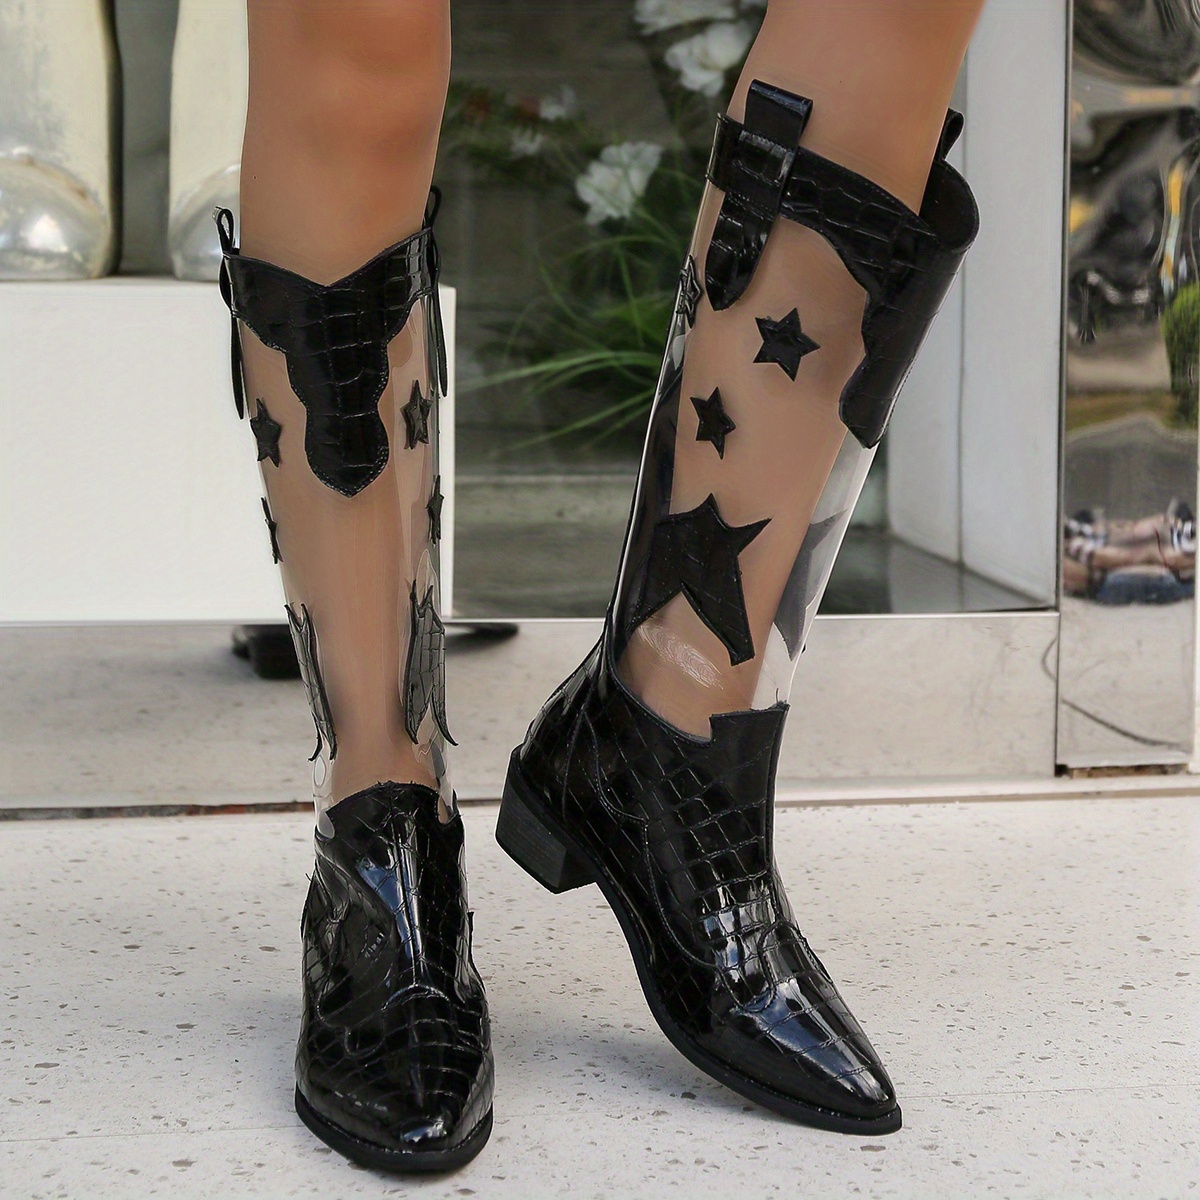 vamp cowboy boots women s star transparent pointed toe